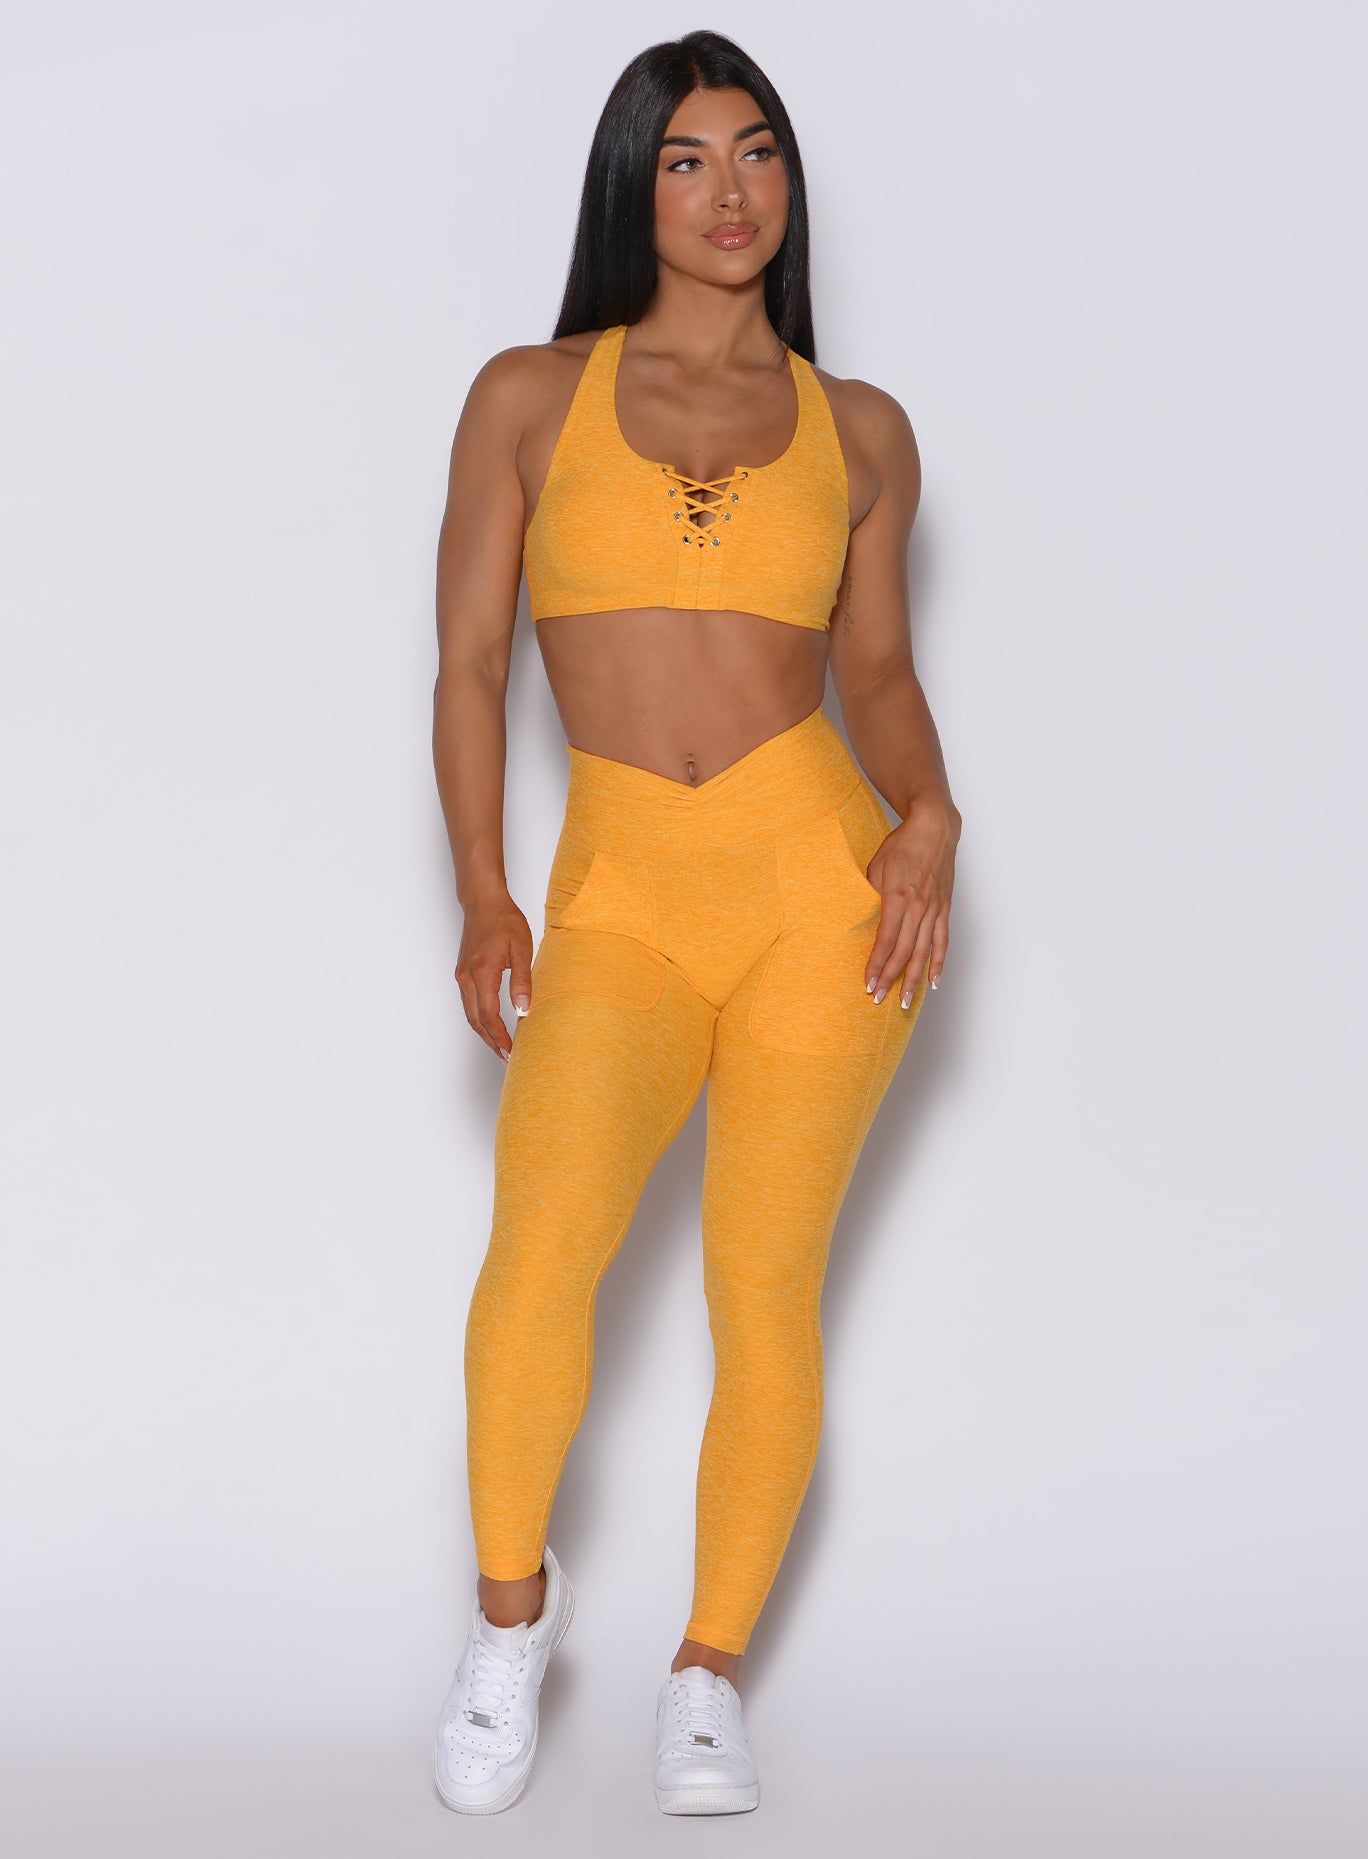 Front  profile view of a model wearing our V scrunch leggings in sinkissed color and a matching bra